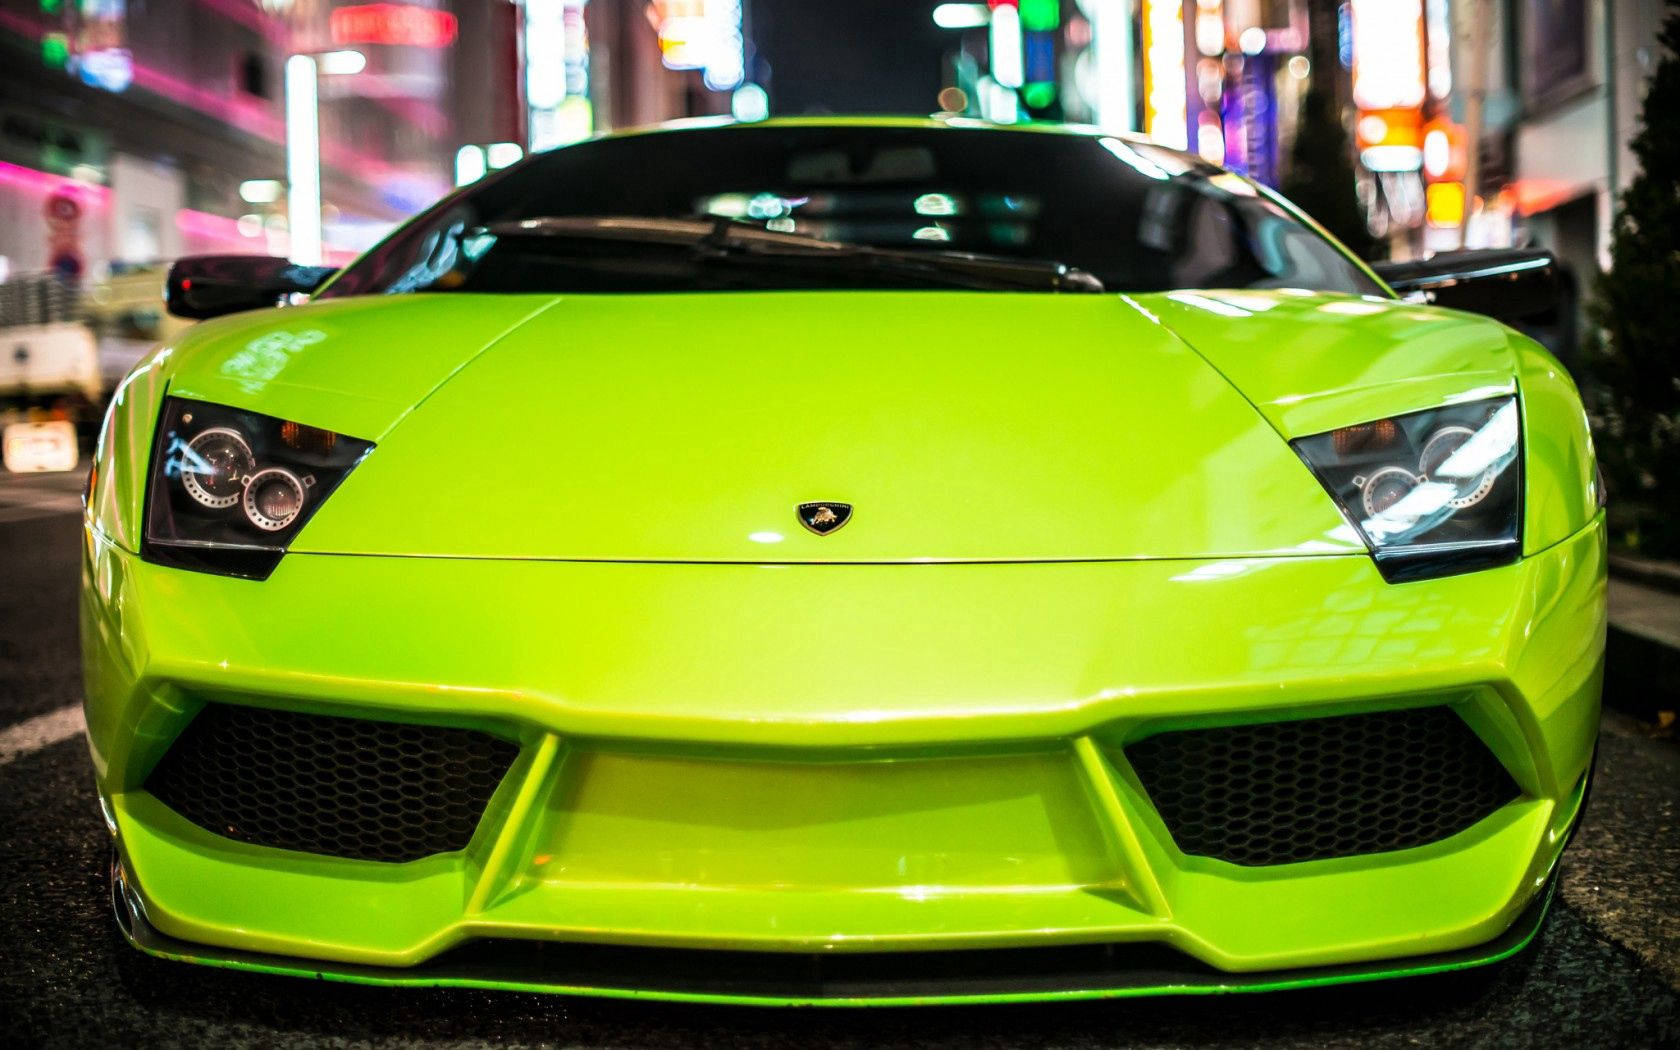 "Electric and Exotic: catching eyes with a Neon Green Lamborghini Gallardo" Wallpaper